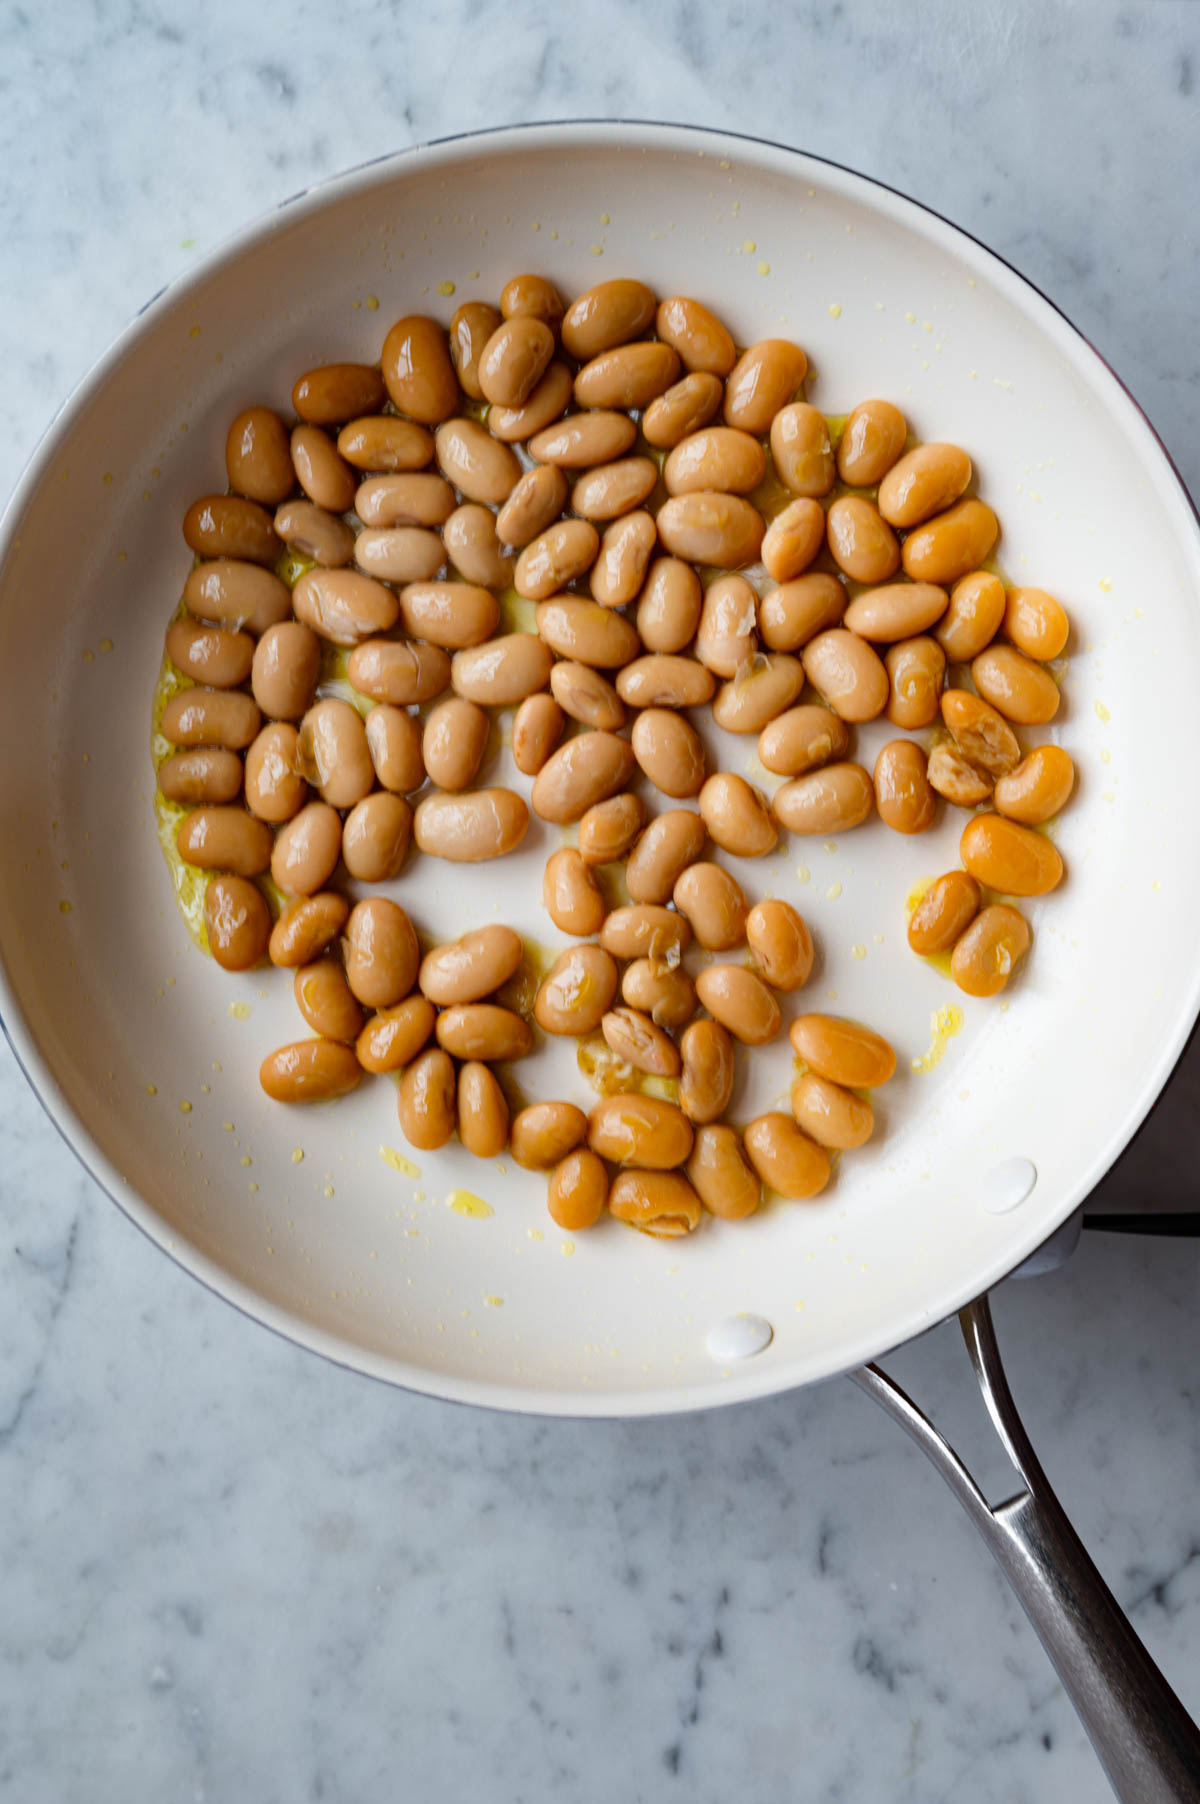 Pan fried golden butter beans in a white skillet.